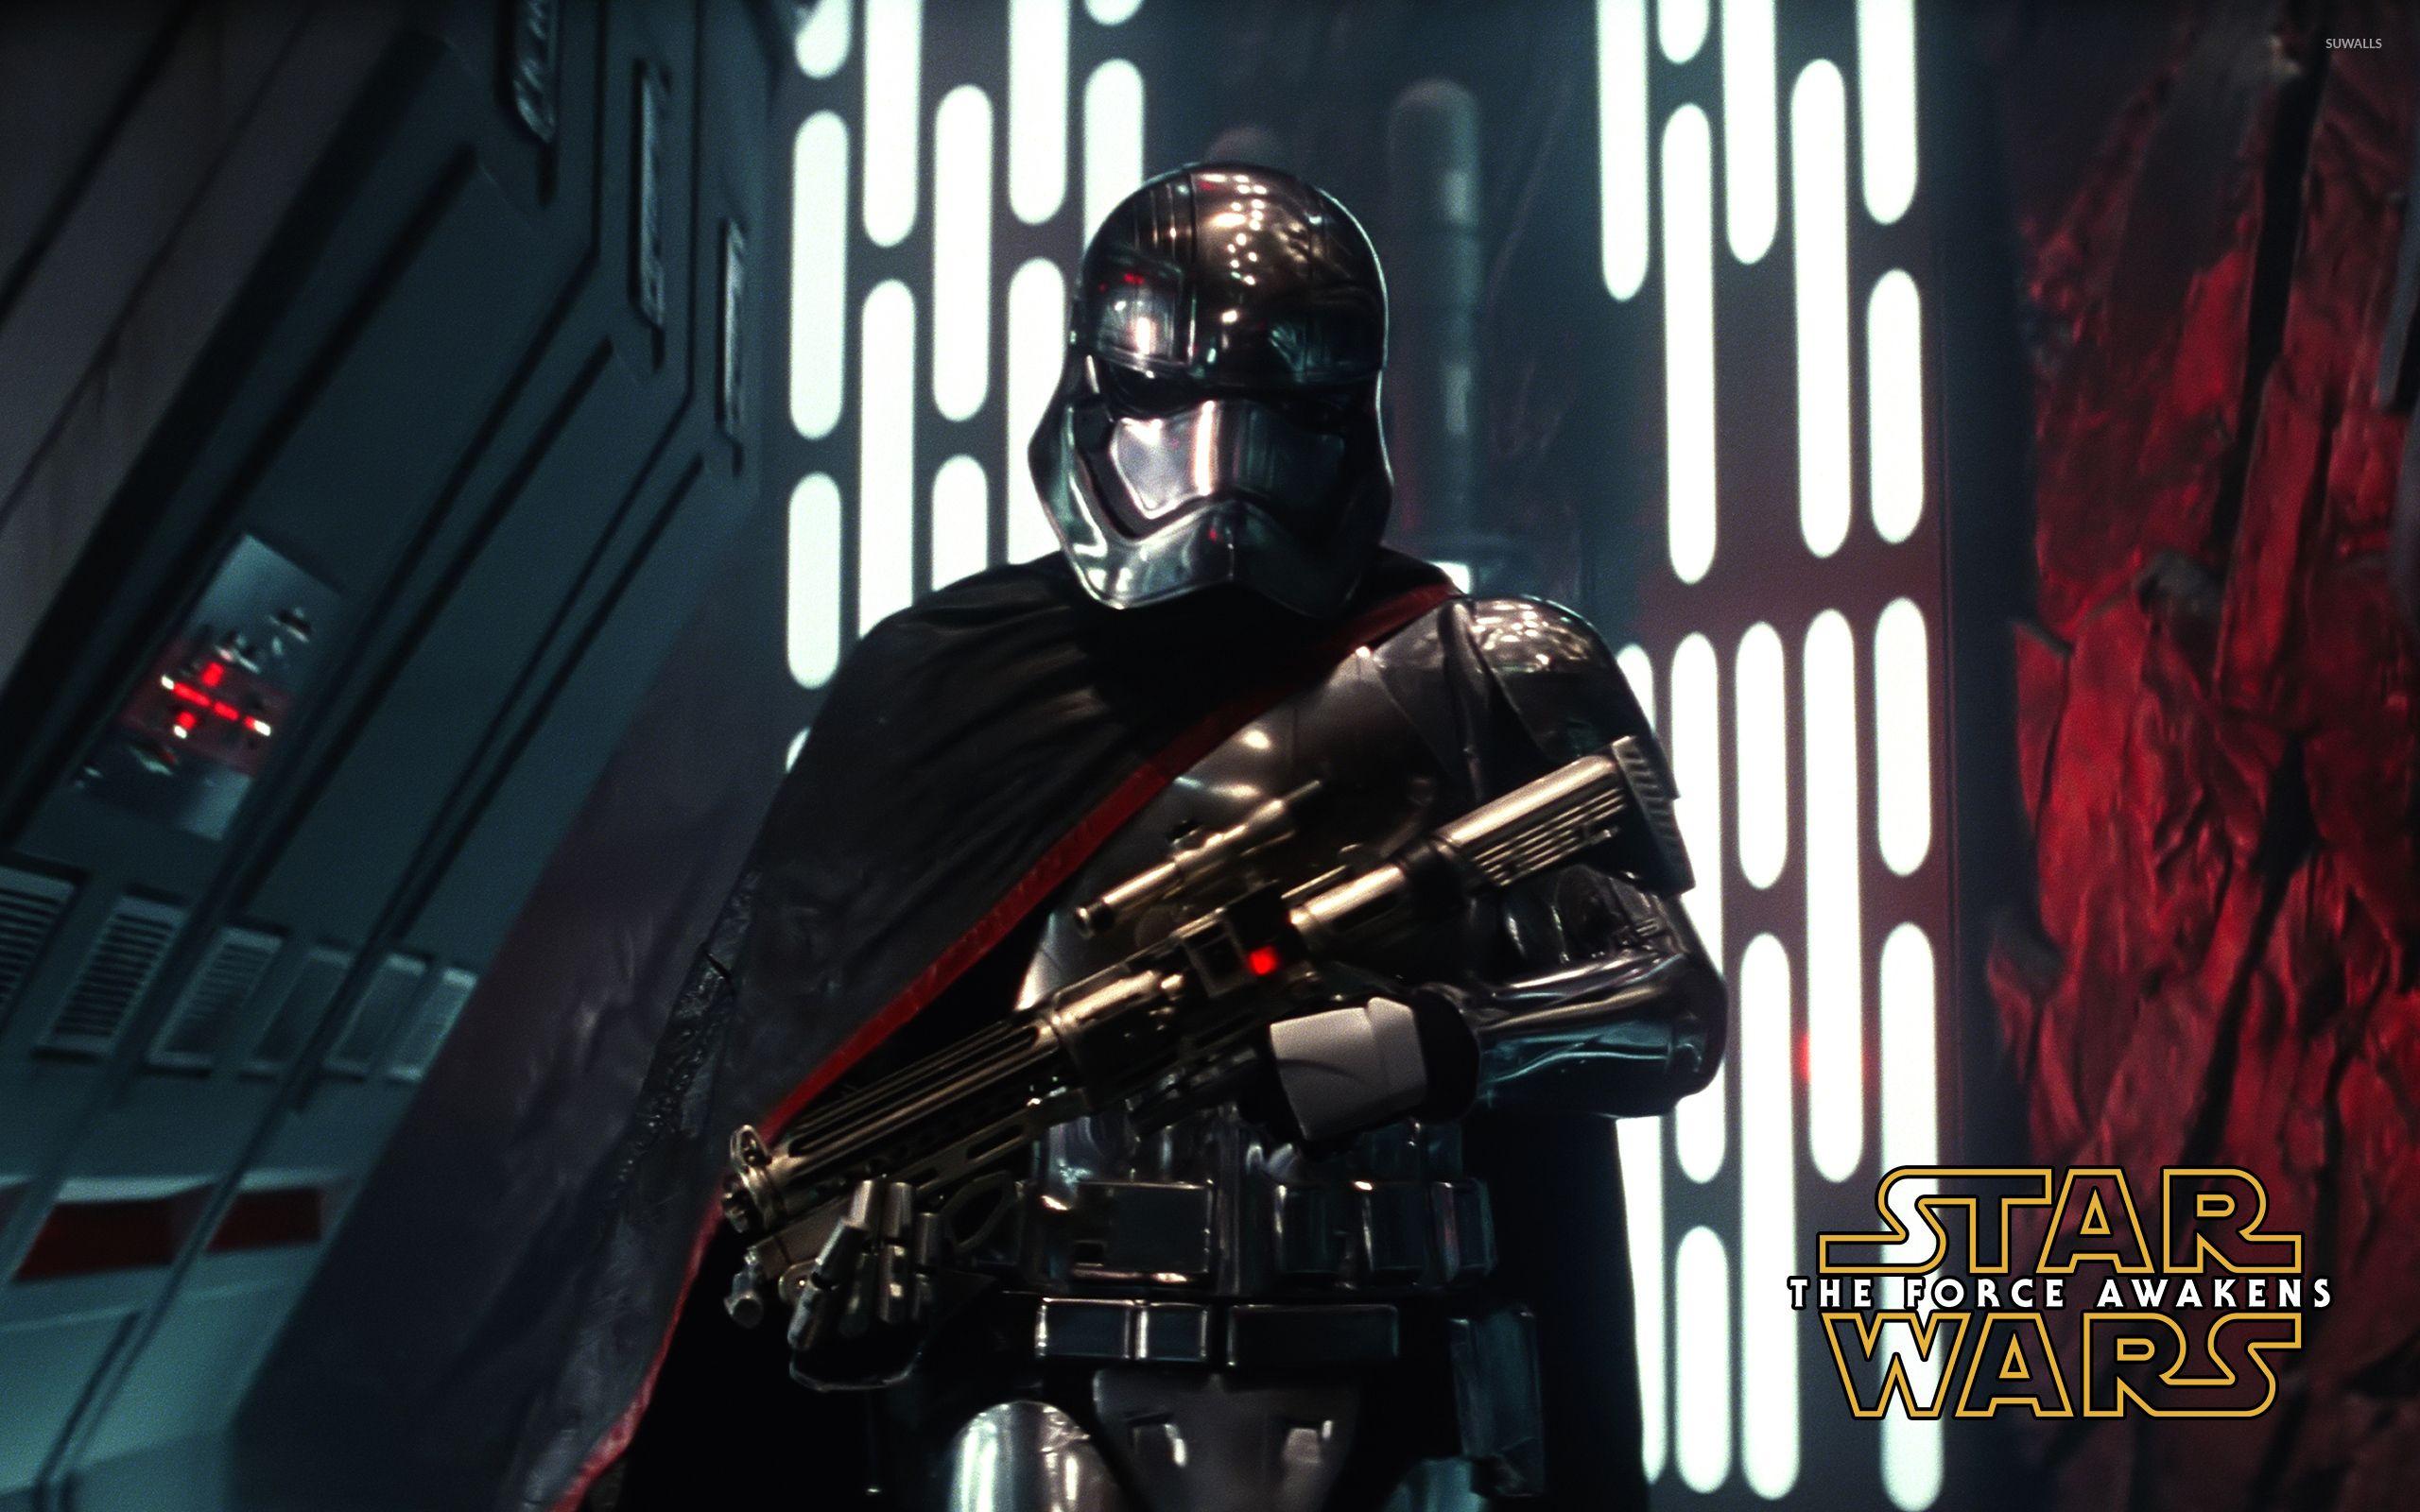 Captain Phasma with a gun Wars: The Force Awakens